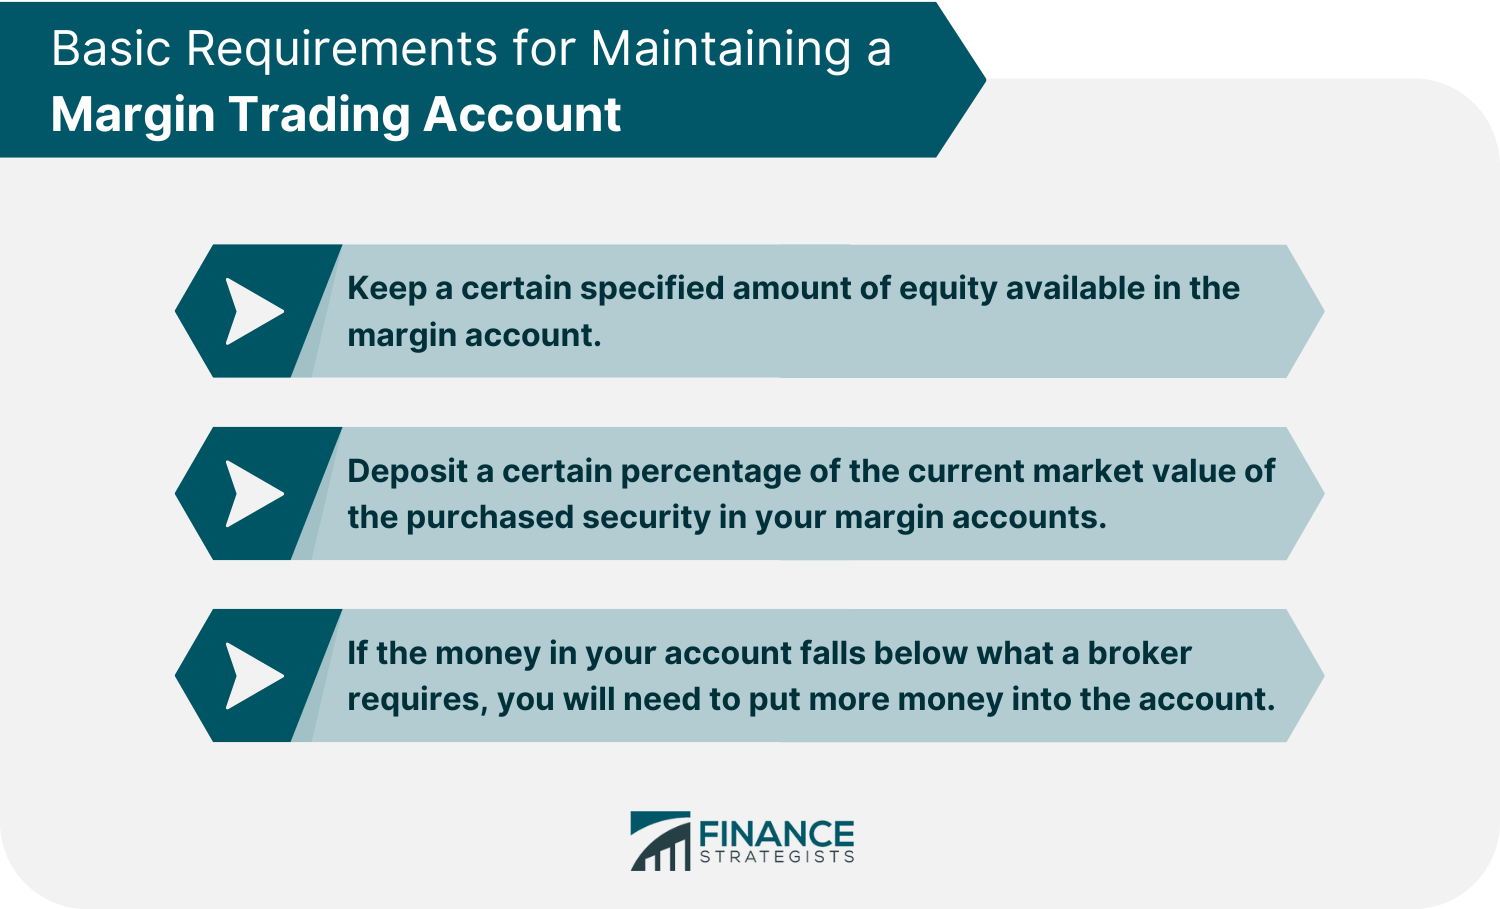 Basic Requirements for Maintaining a Margin Trading Account